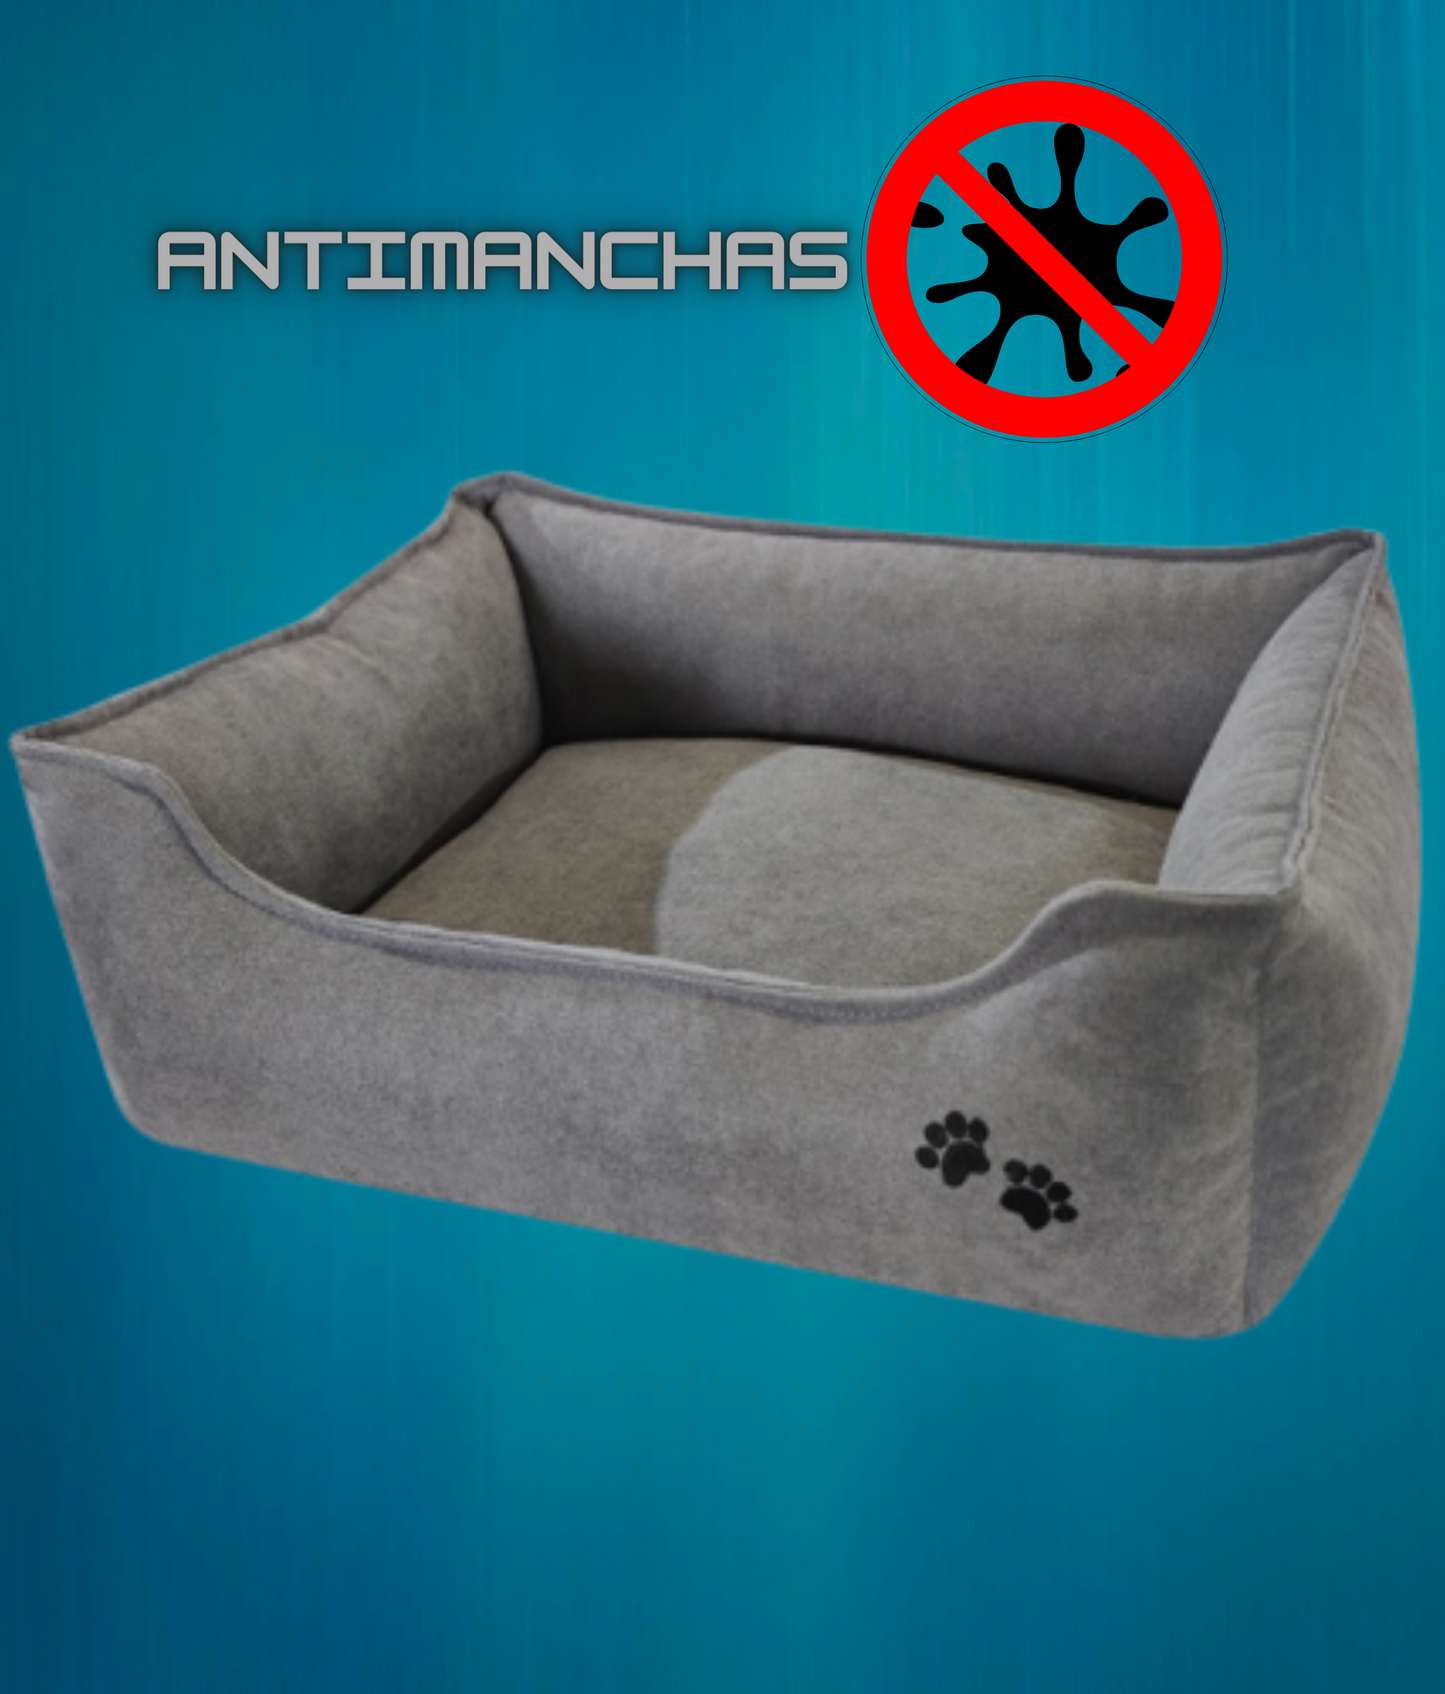 ANTI-STAIN GR dog bed